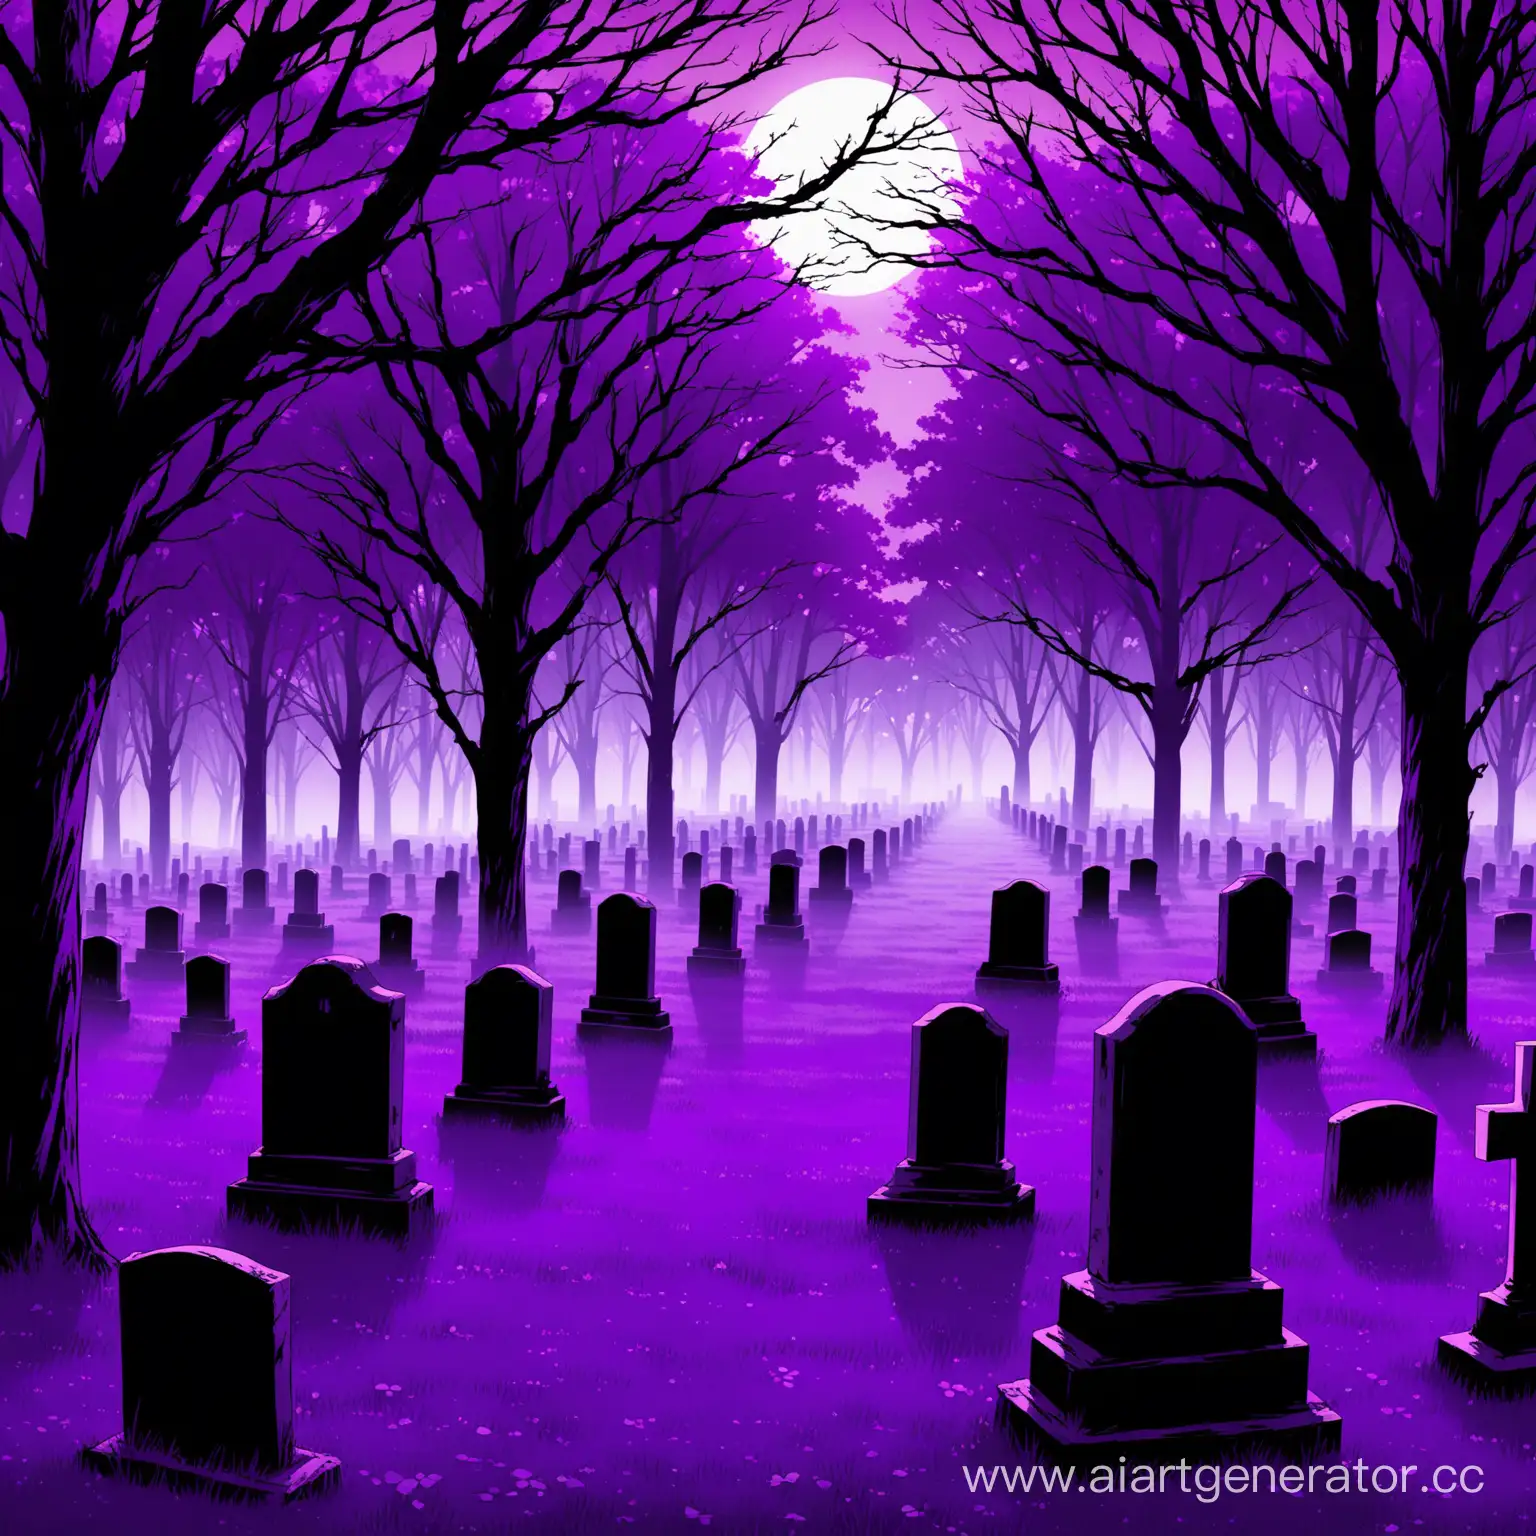 Ethereal-Twilight-Tranquil-Graveyard-in-Shades-of-Purple